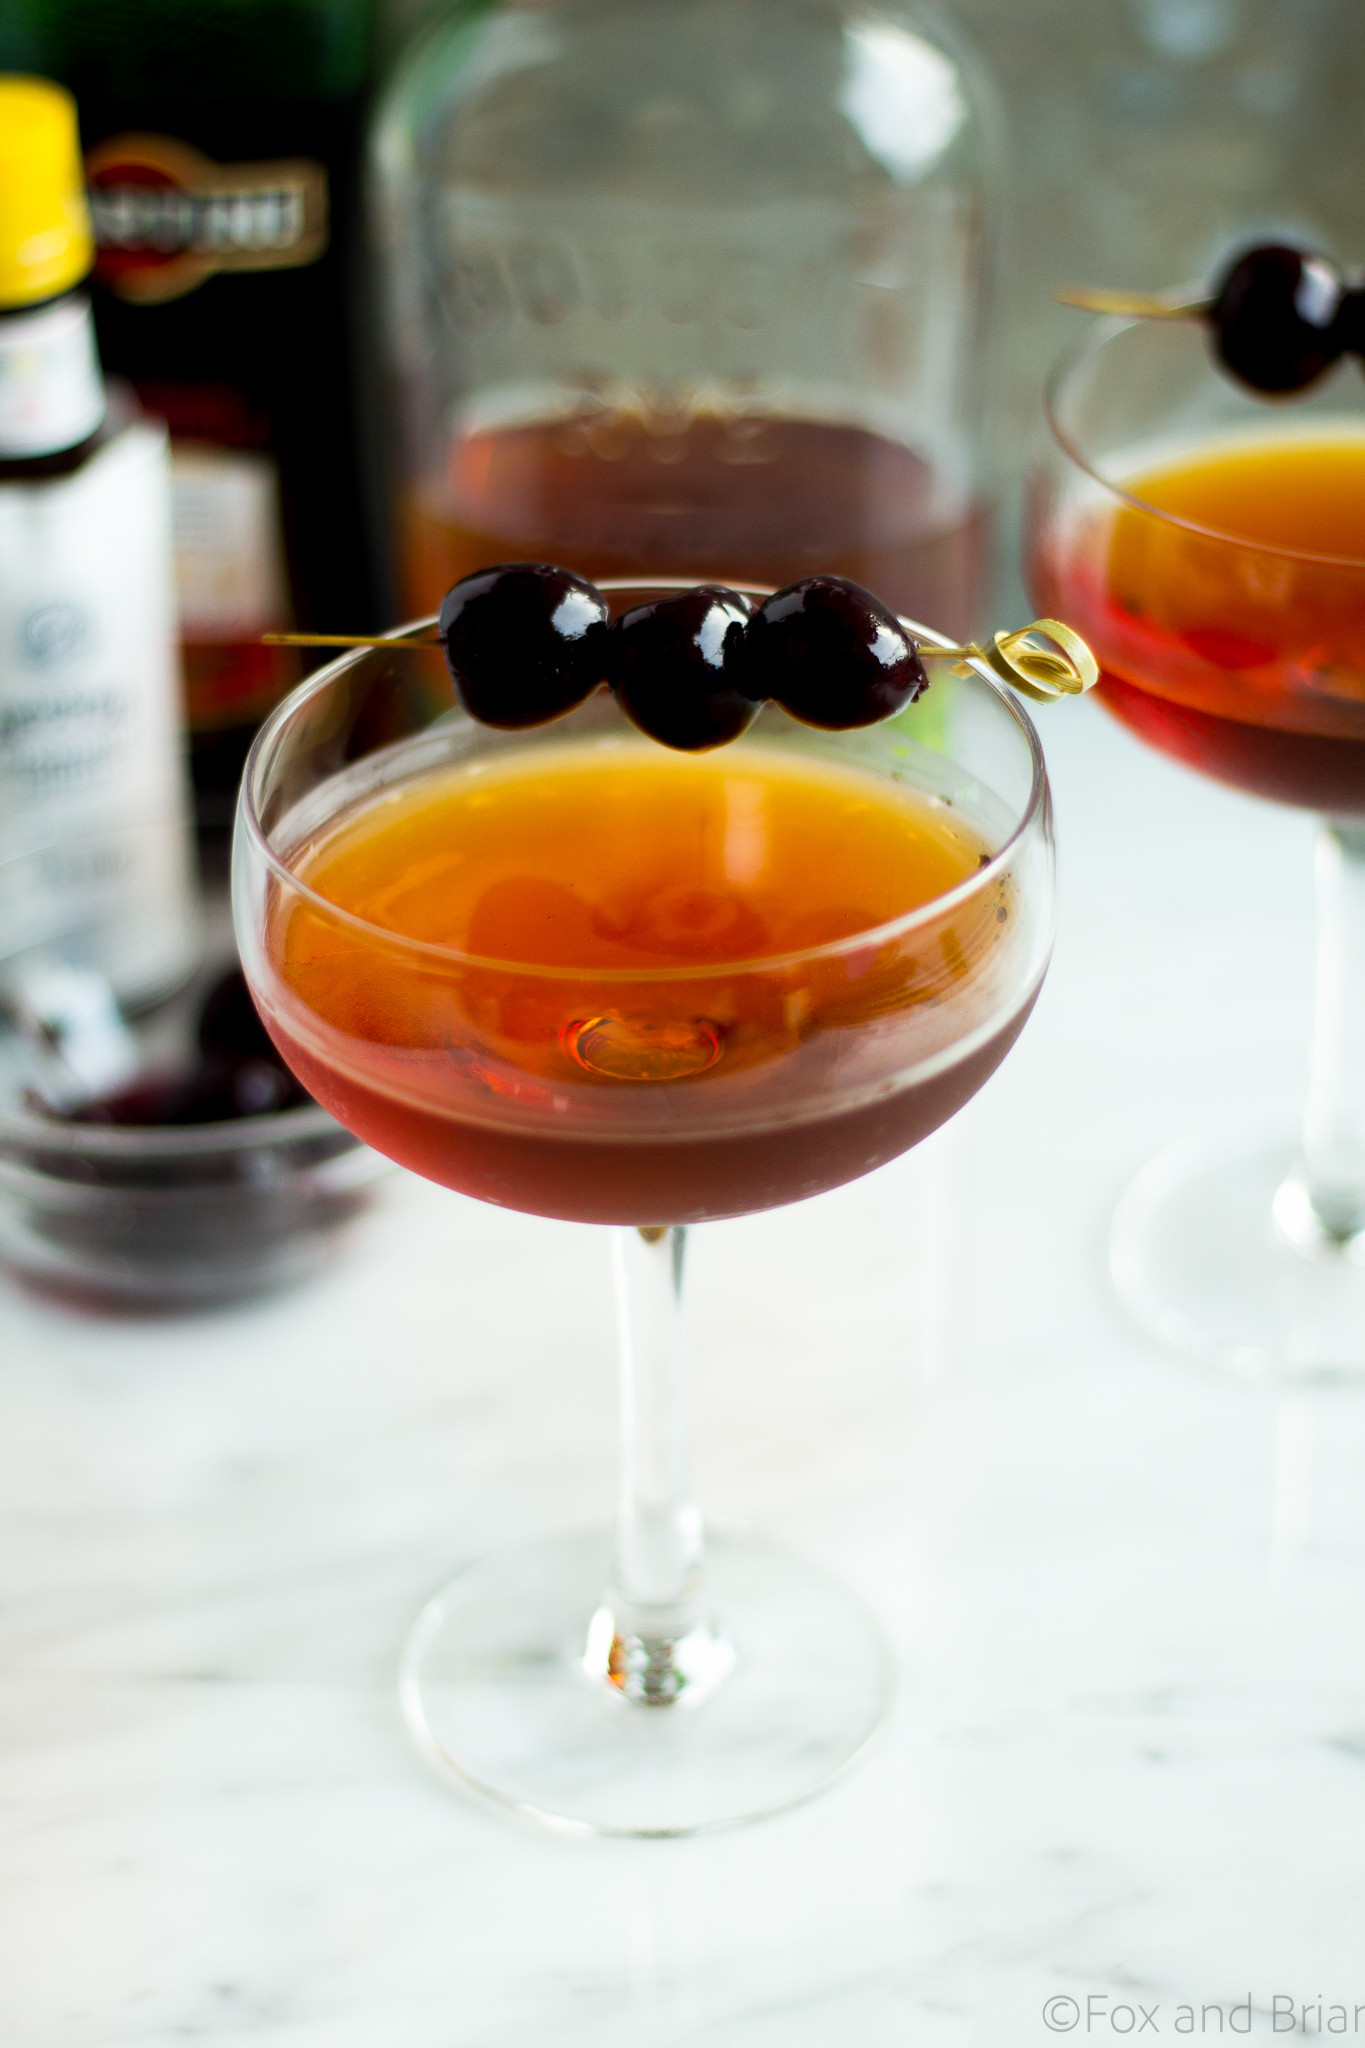 Best Whiskey Cocktails
 The 17 Best Whiskey Drinks You Can Make at Home